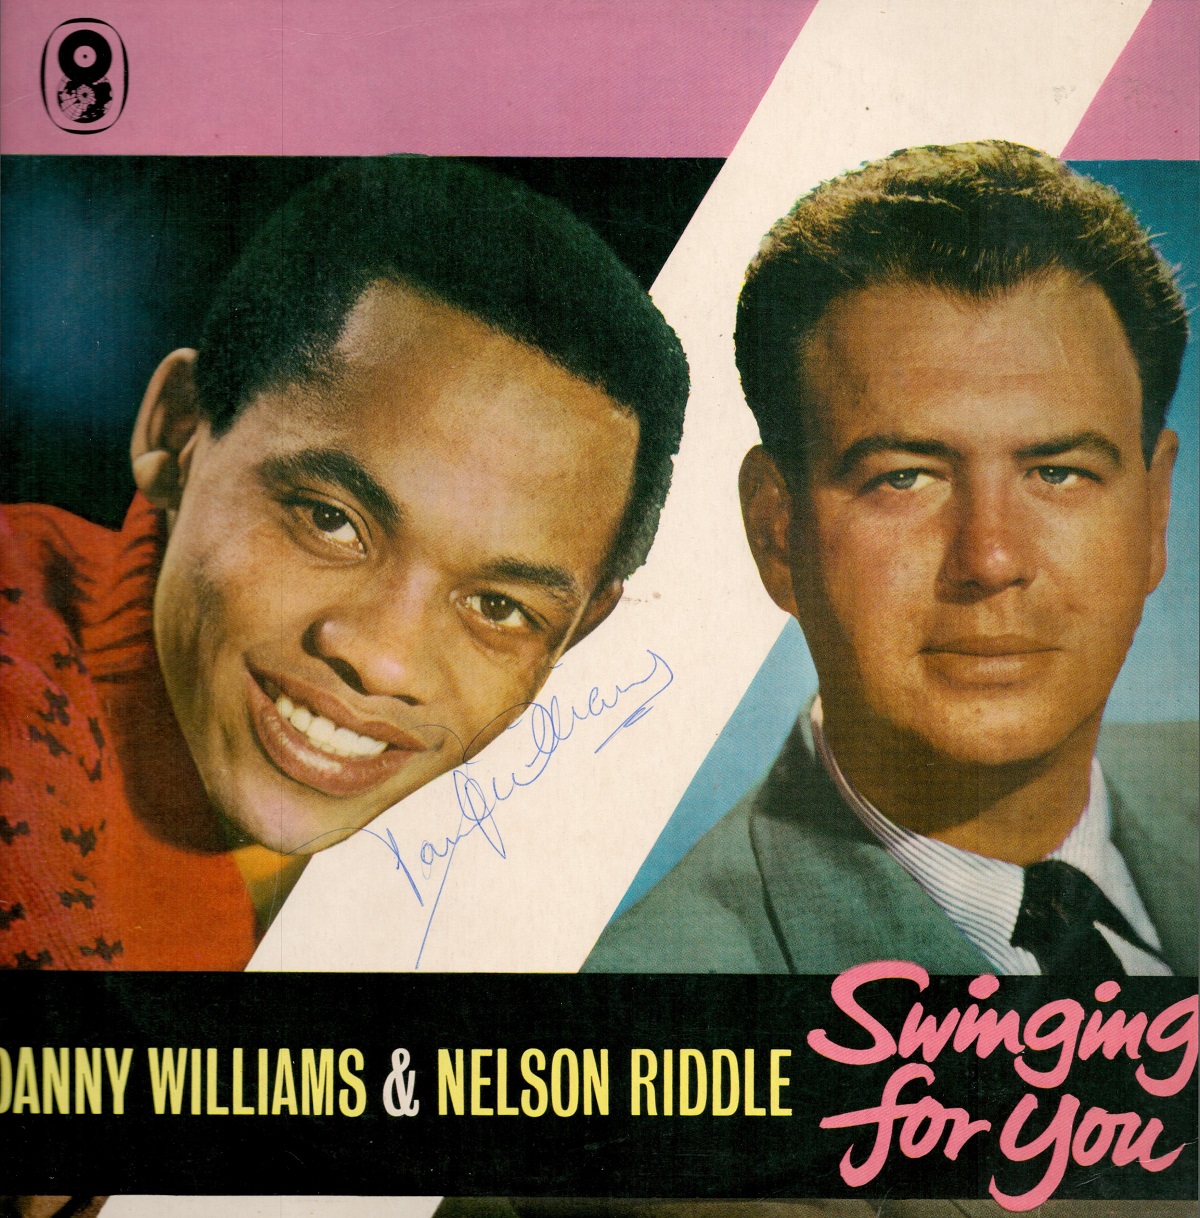 Danny Williams (1942-2005) & Nelson Riddle Lp Record 'Swinging For You' Signed To The Cover By Danny